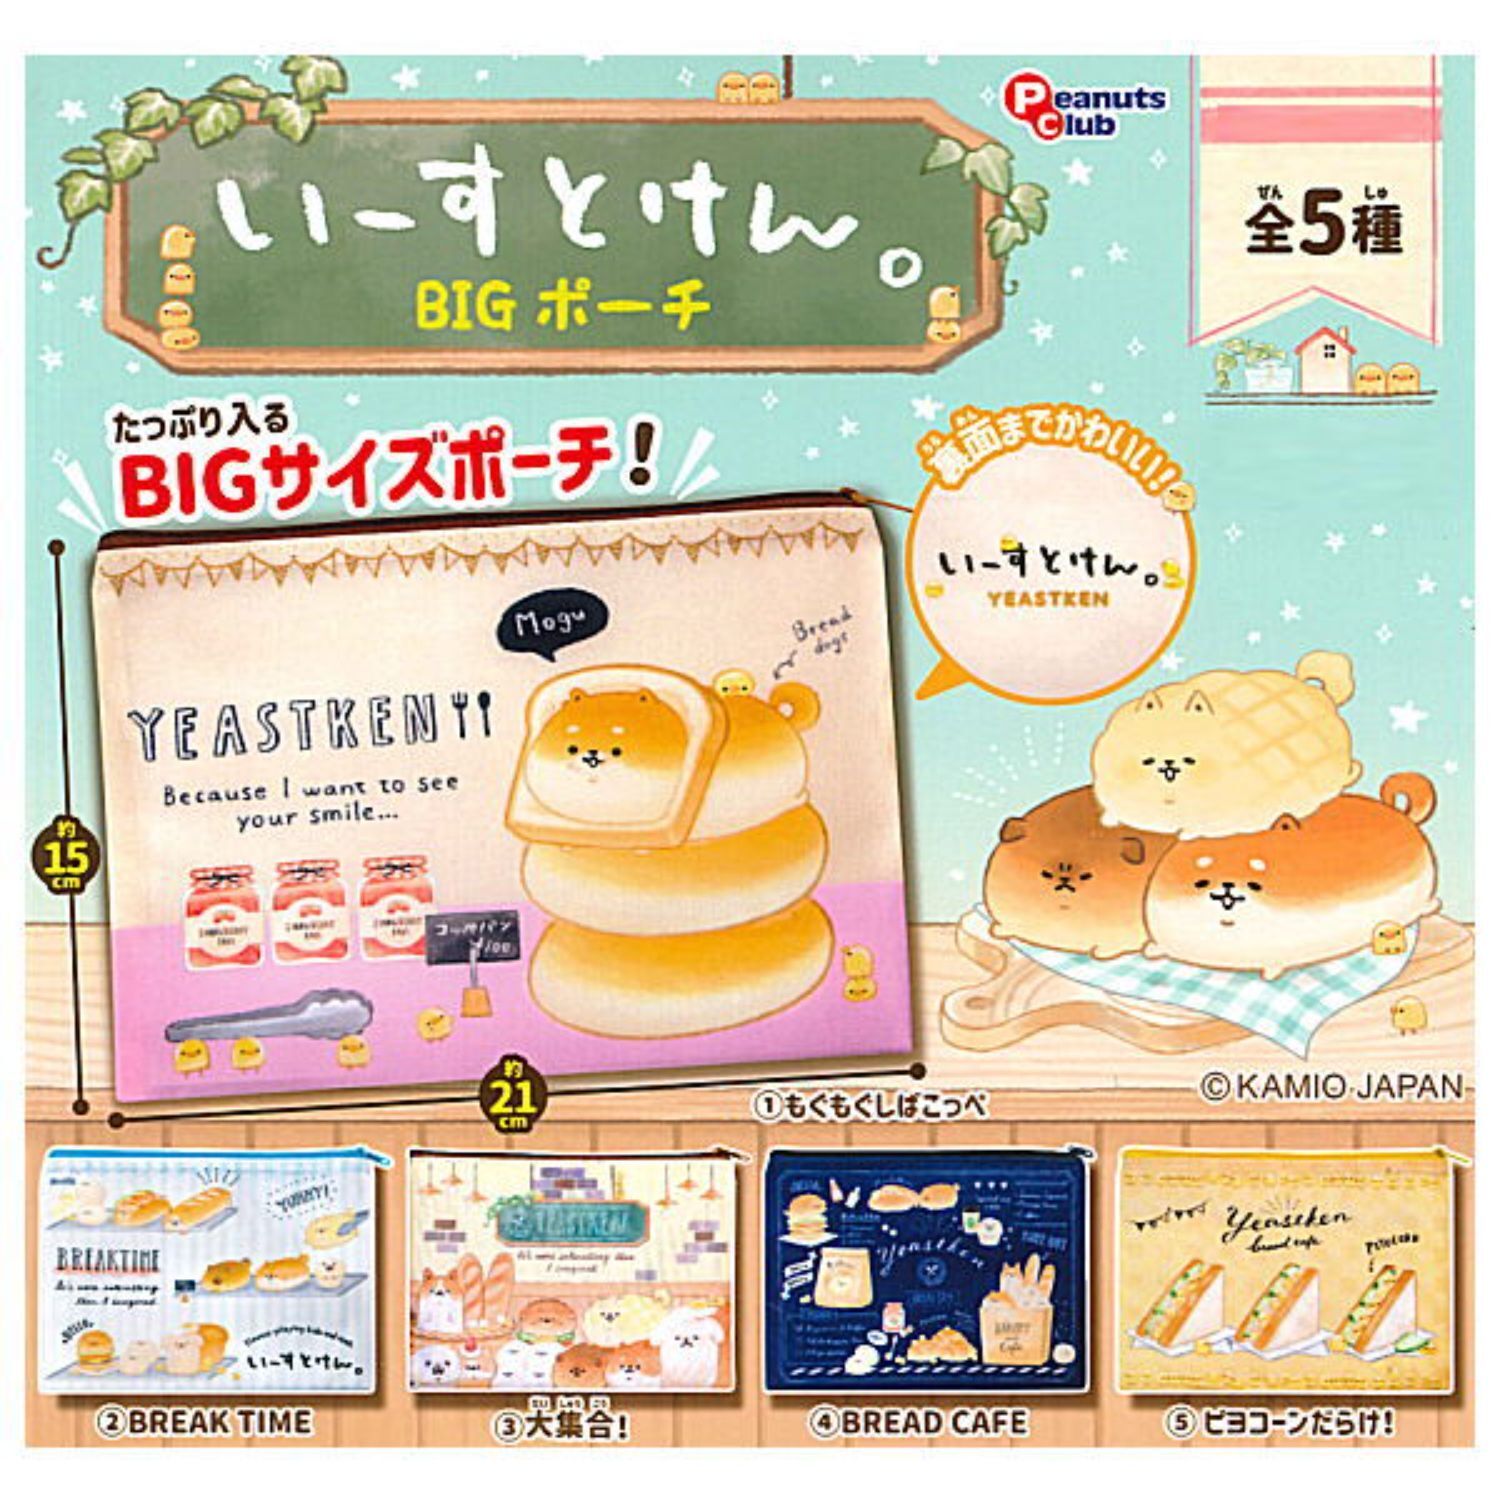 Yeast ken. BIG pouch Capsule Toy 5 Types Full Comp Set Gacha New